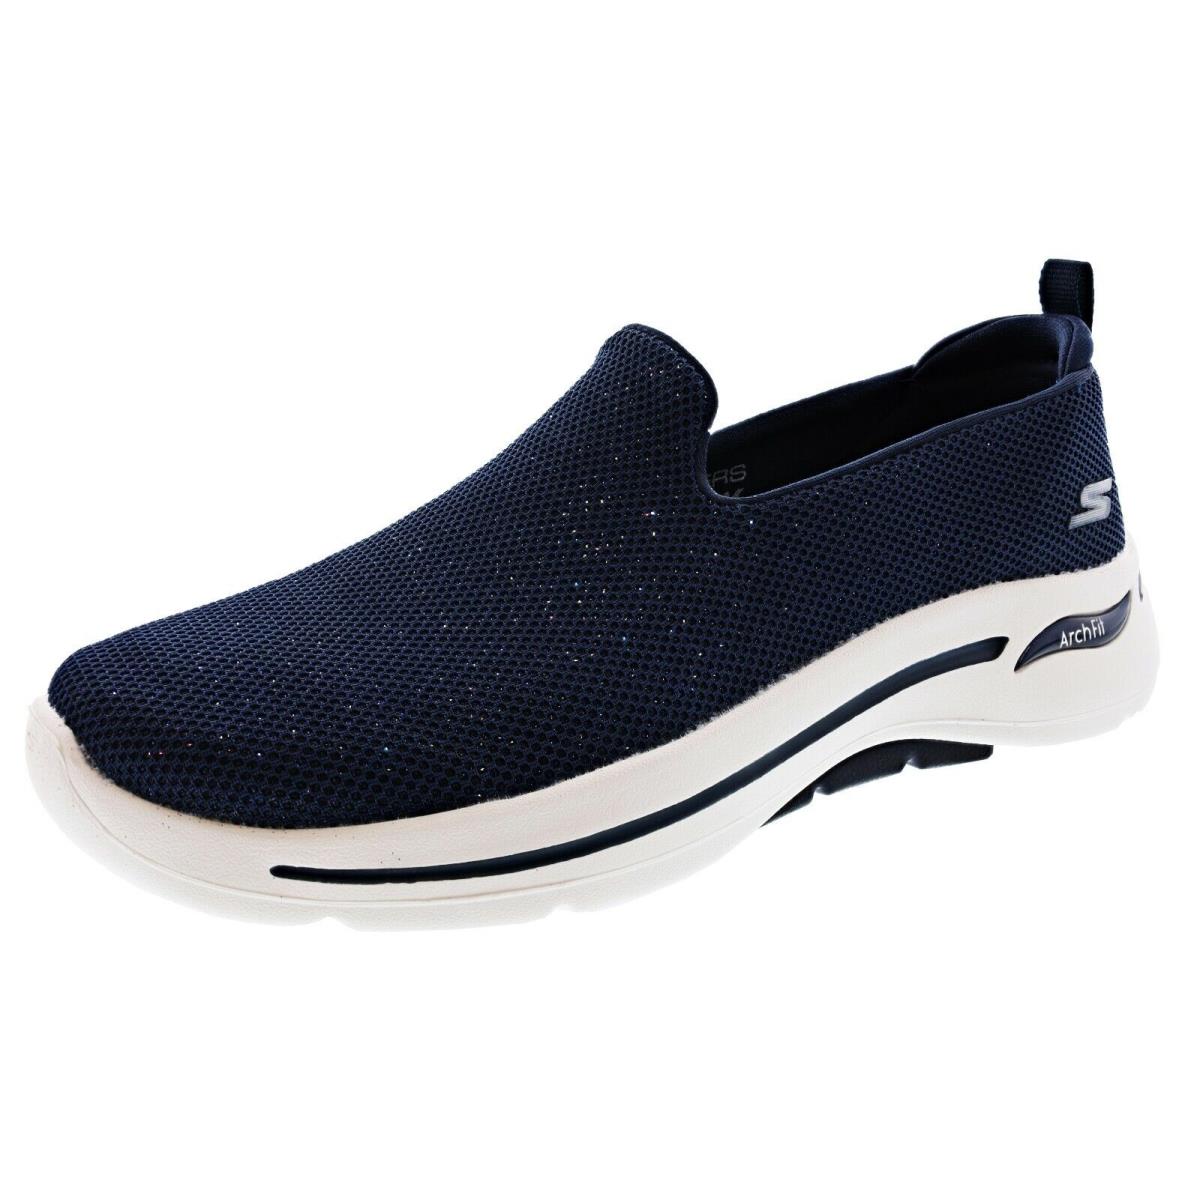 Skechers Women`s GO Walk Arch Fit- Vividly 124417NVY Slip ON Walking Shoes